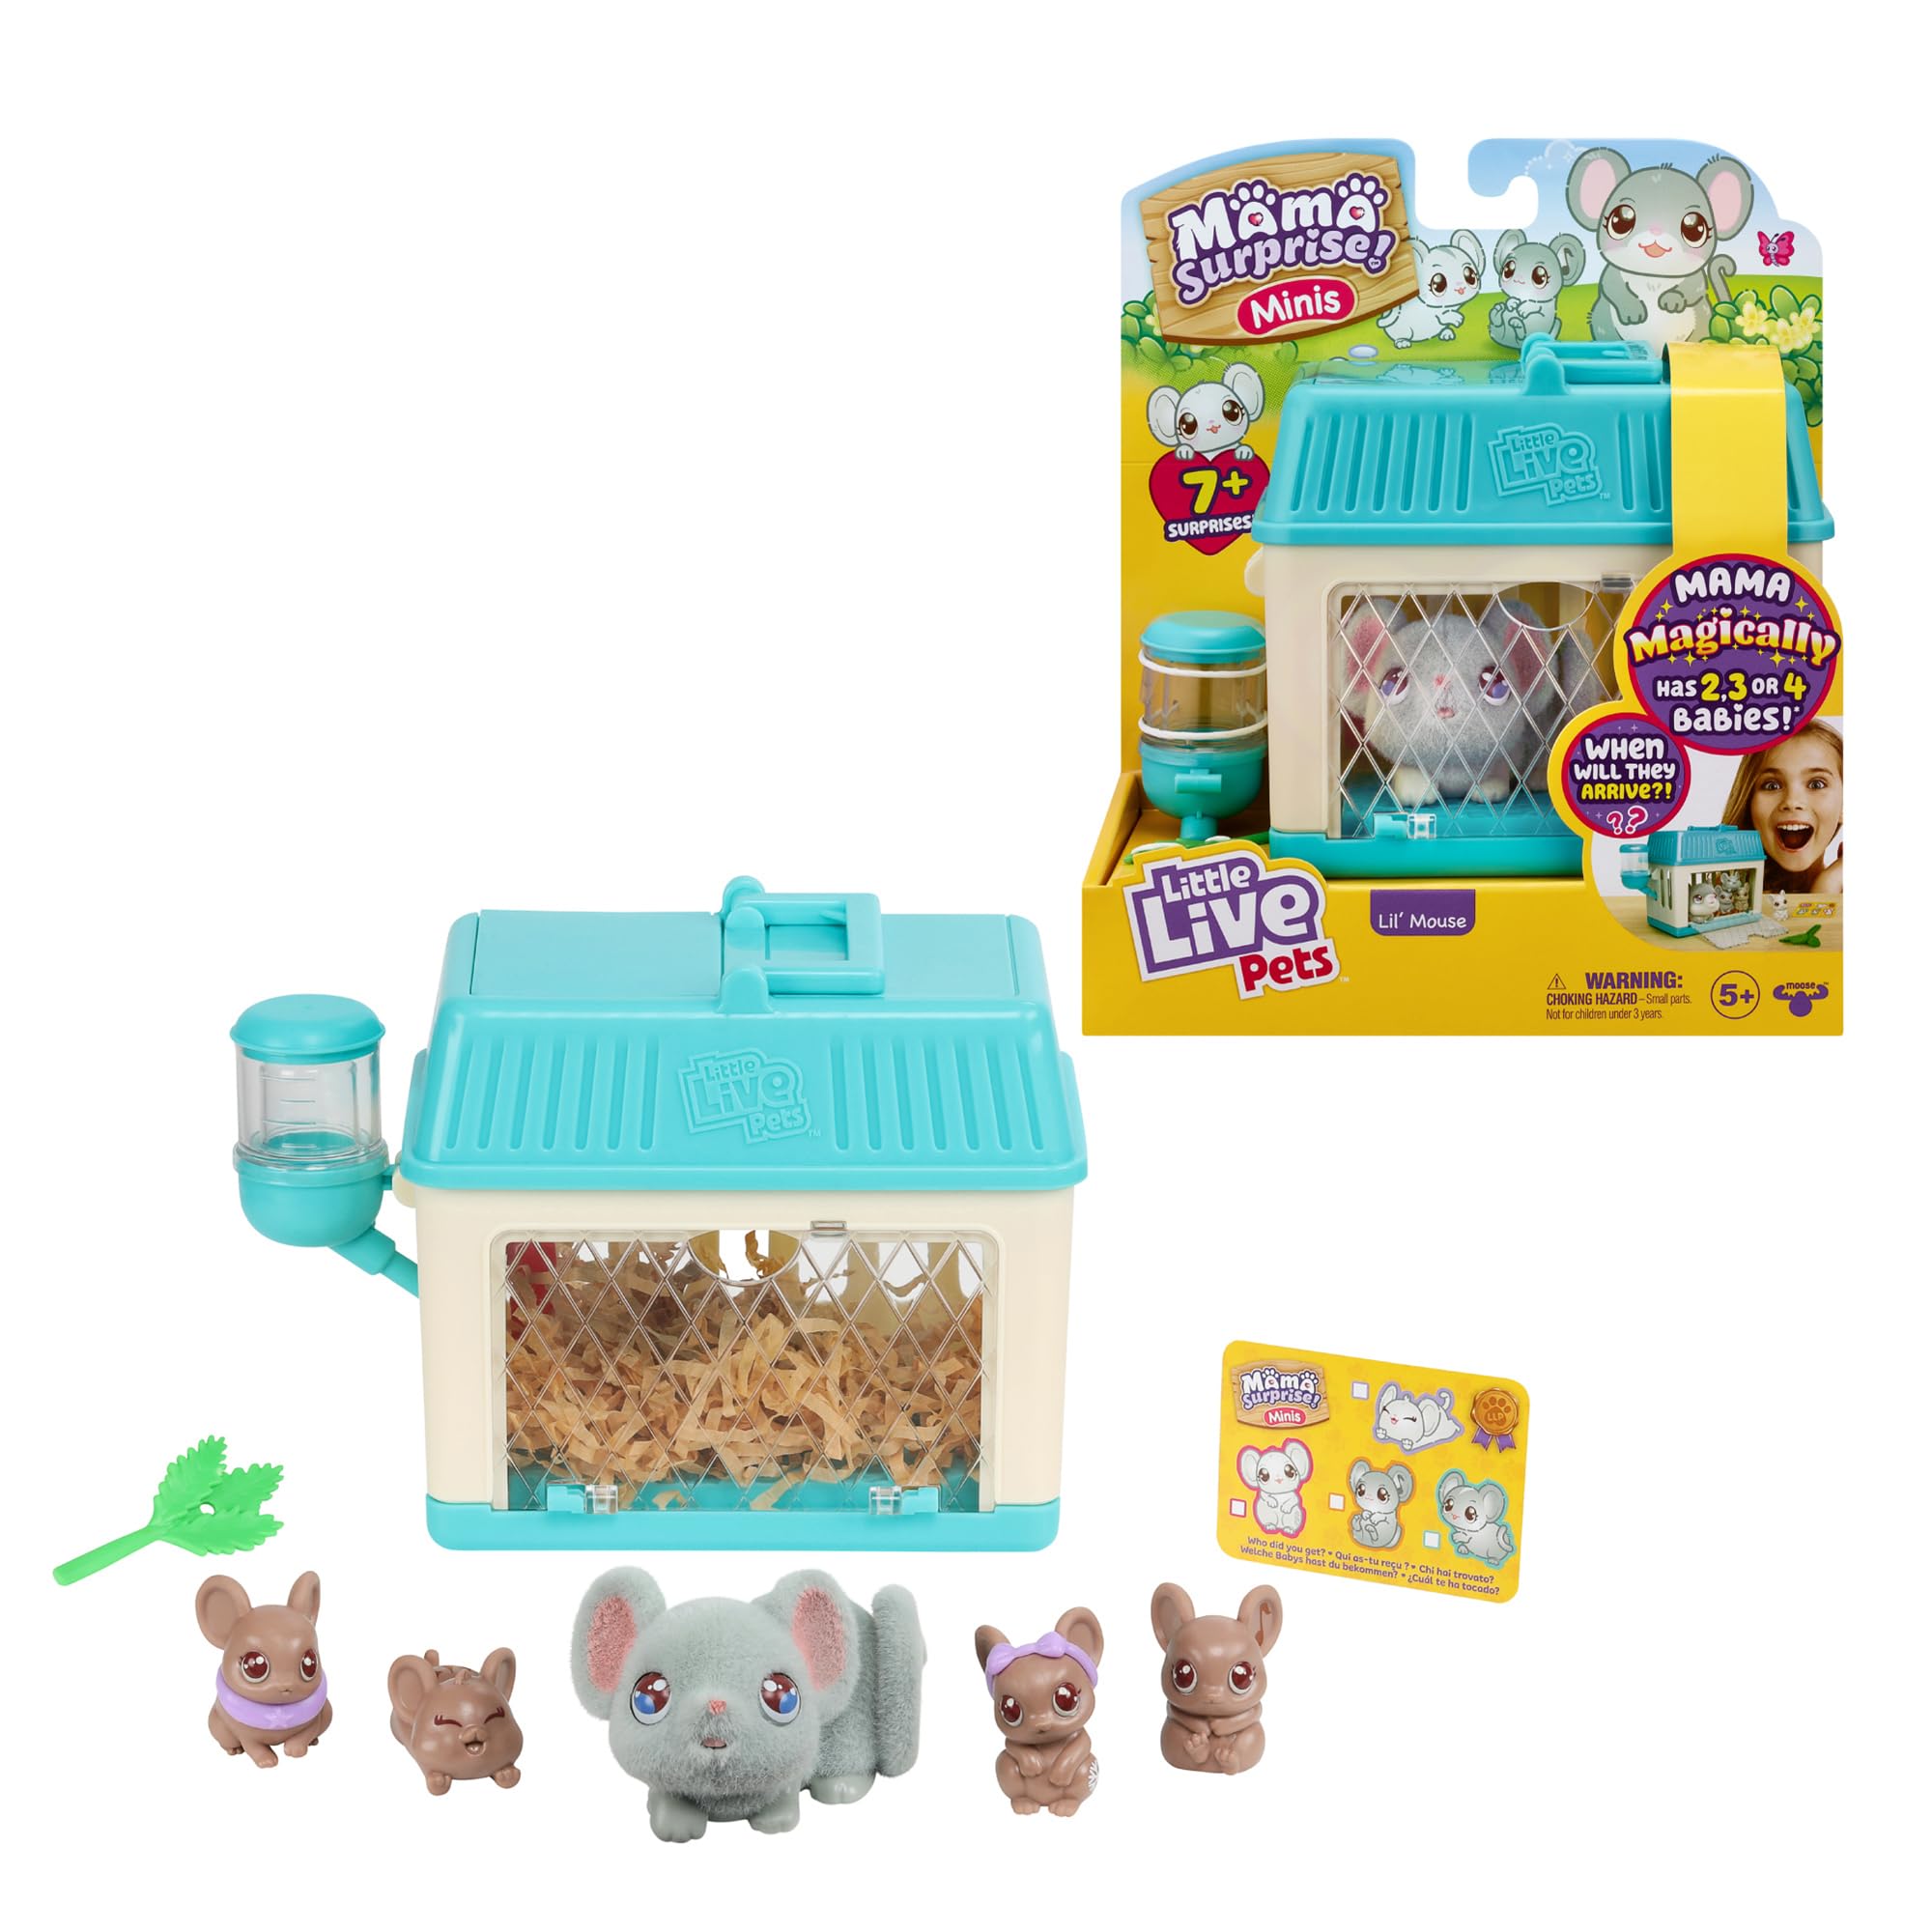 Little Live Pets - Mama Surprise Minis Feed and Nurture a Lil Mouse Inside Their Hutch so she can be a Mama She has 2, 3, or 4 B